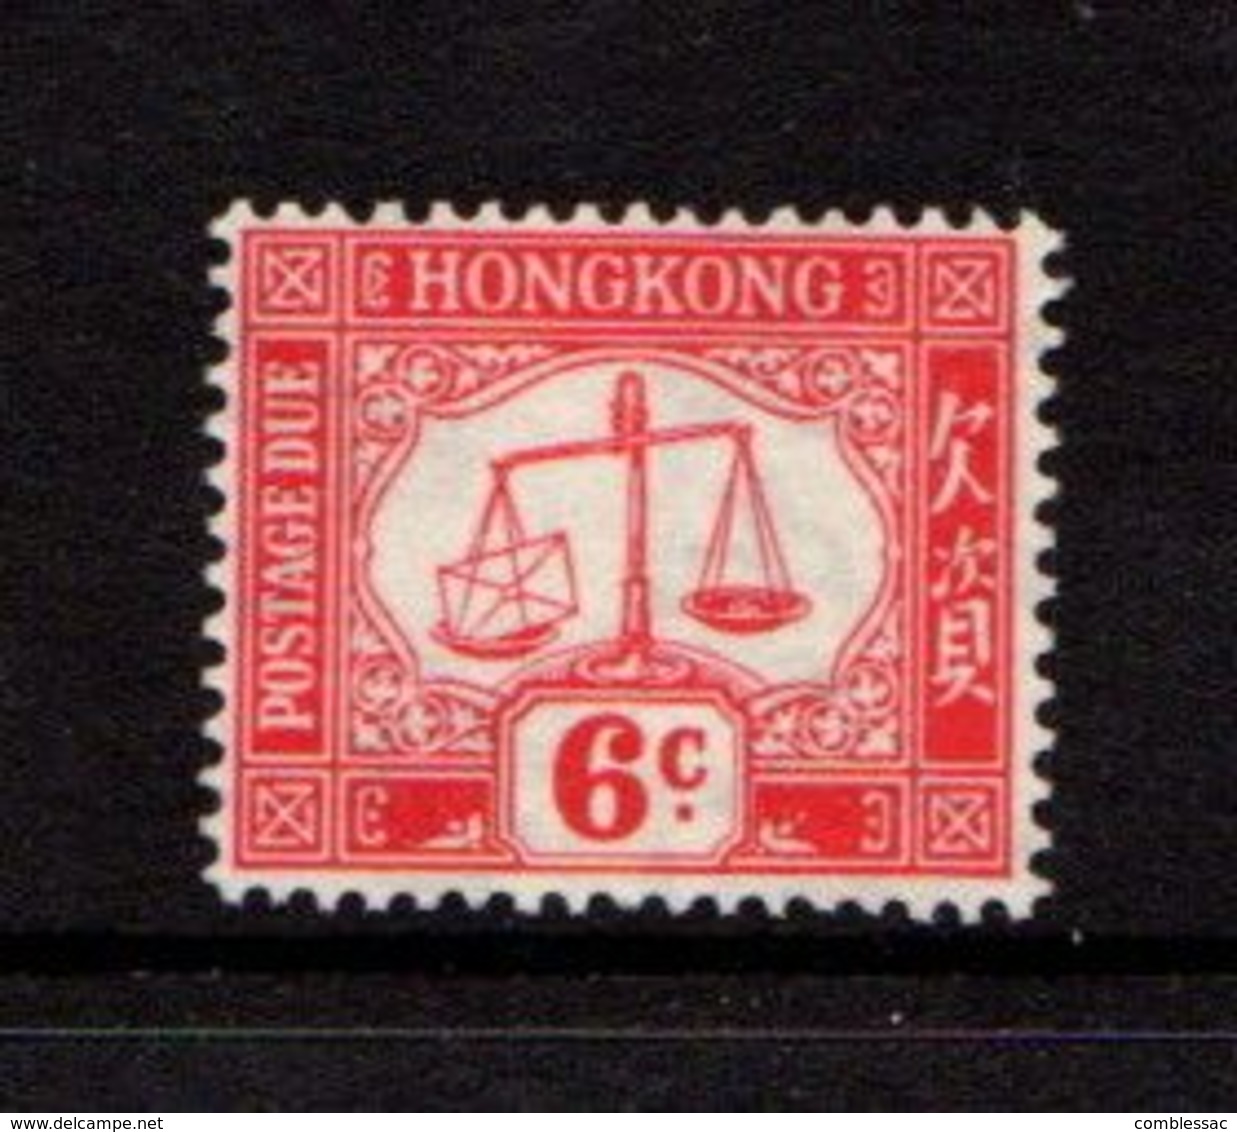 HONG  KONG    1923    Postage  Due    2c  Red    MH - Impuestos